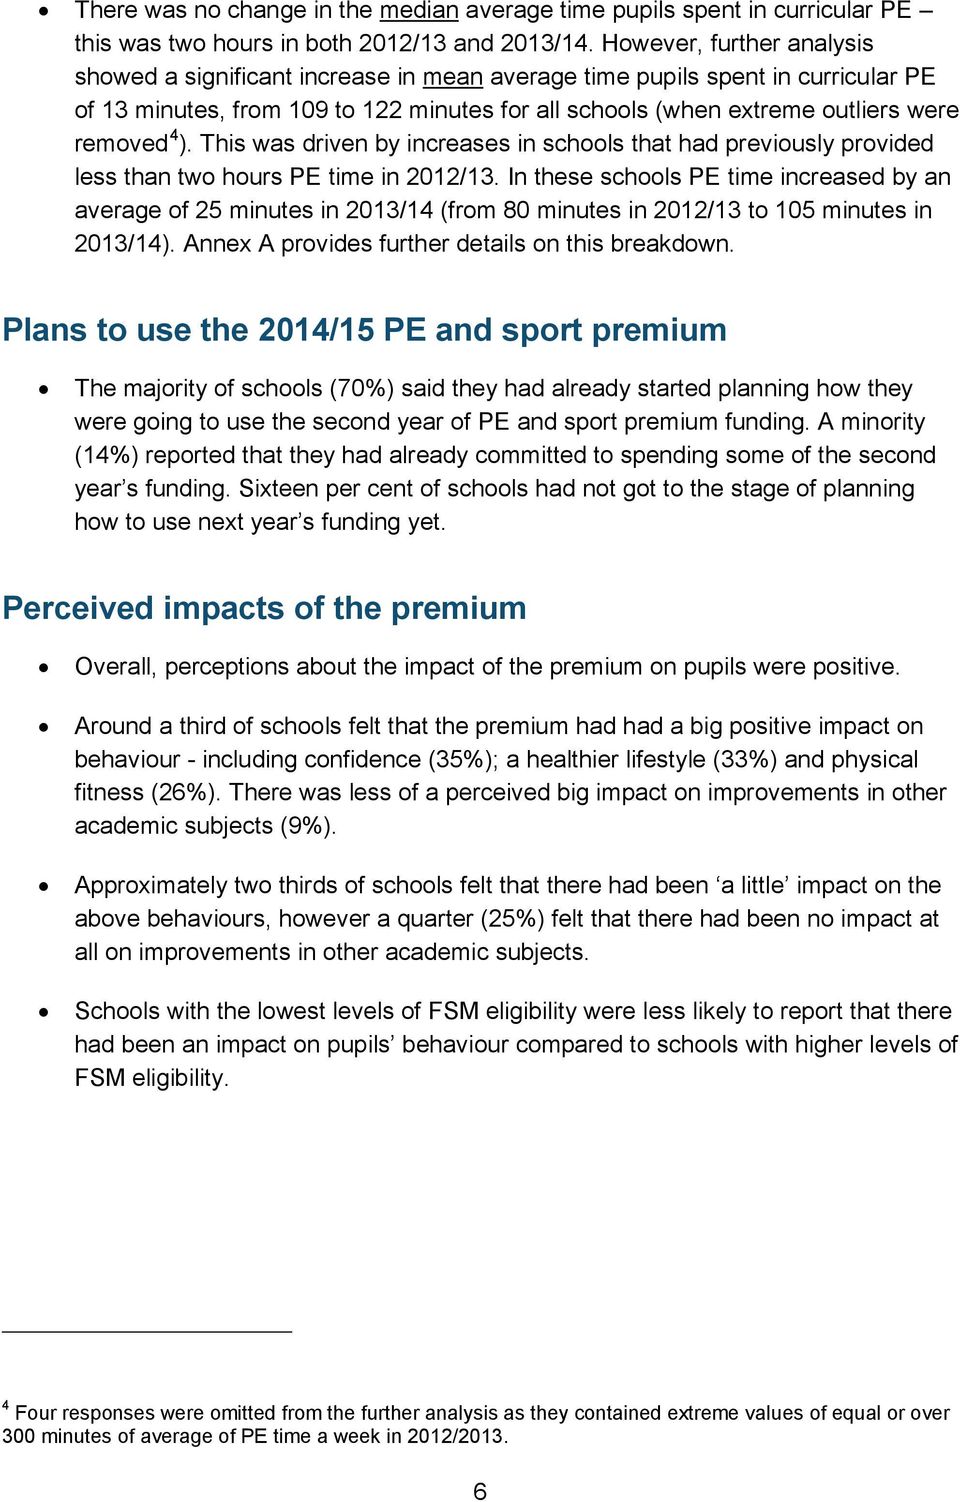 ). This was driven by increases in schools that had previously provided less than two hours PE time in 2012/13.